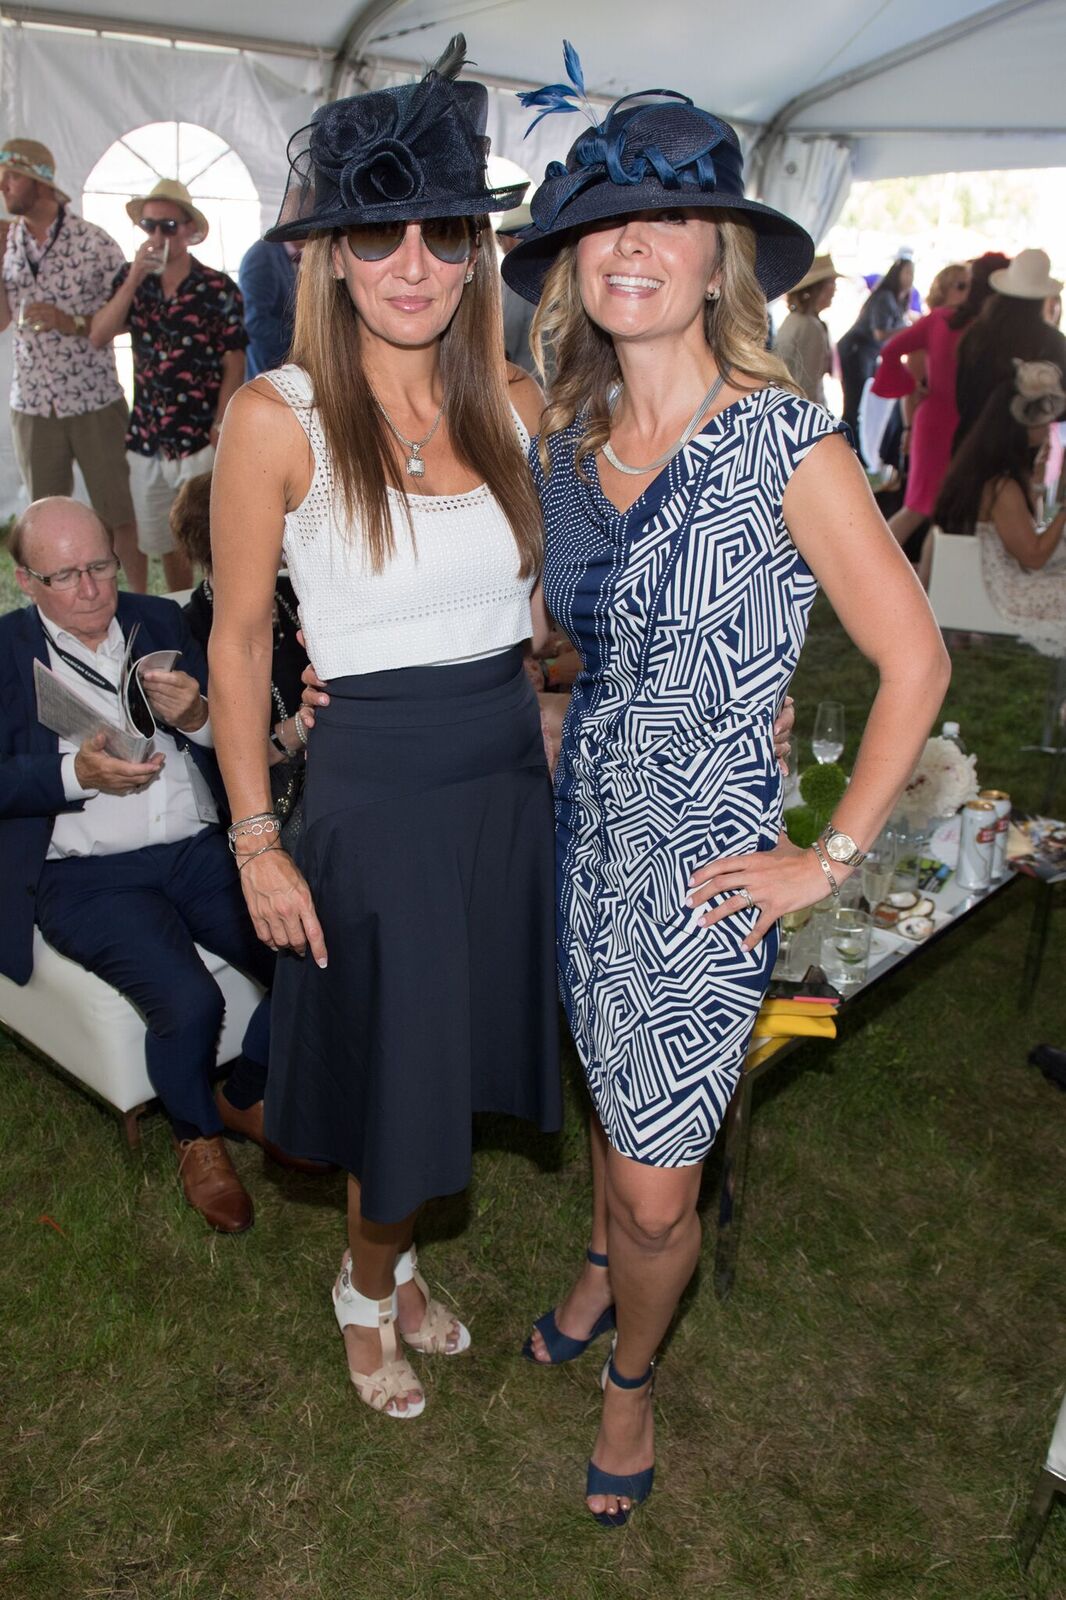 Queen's Plate 2017: 22 Pictures From The Stylish Affair - FASHION Magazine